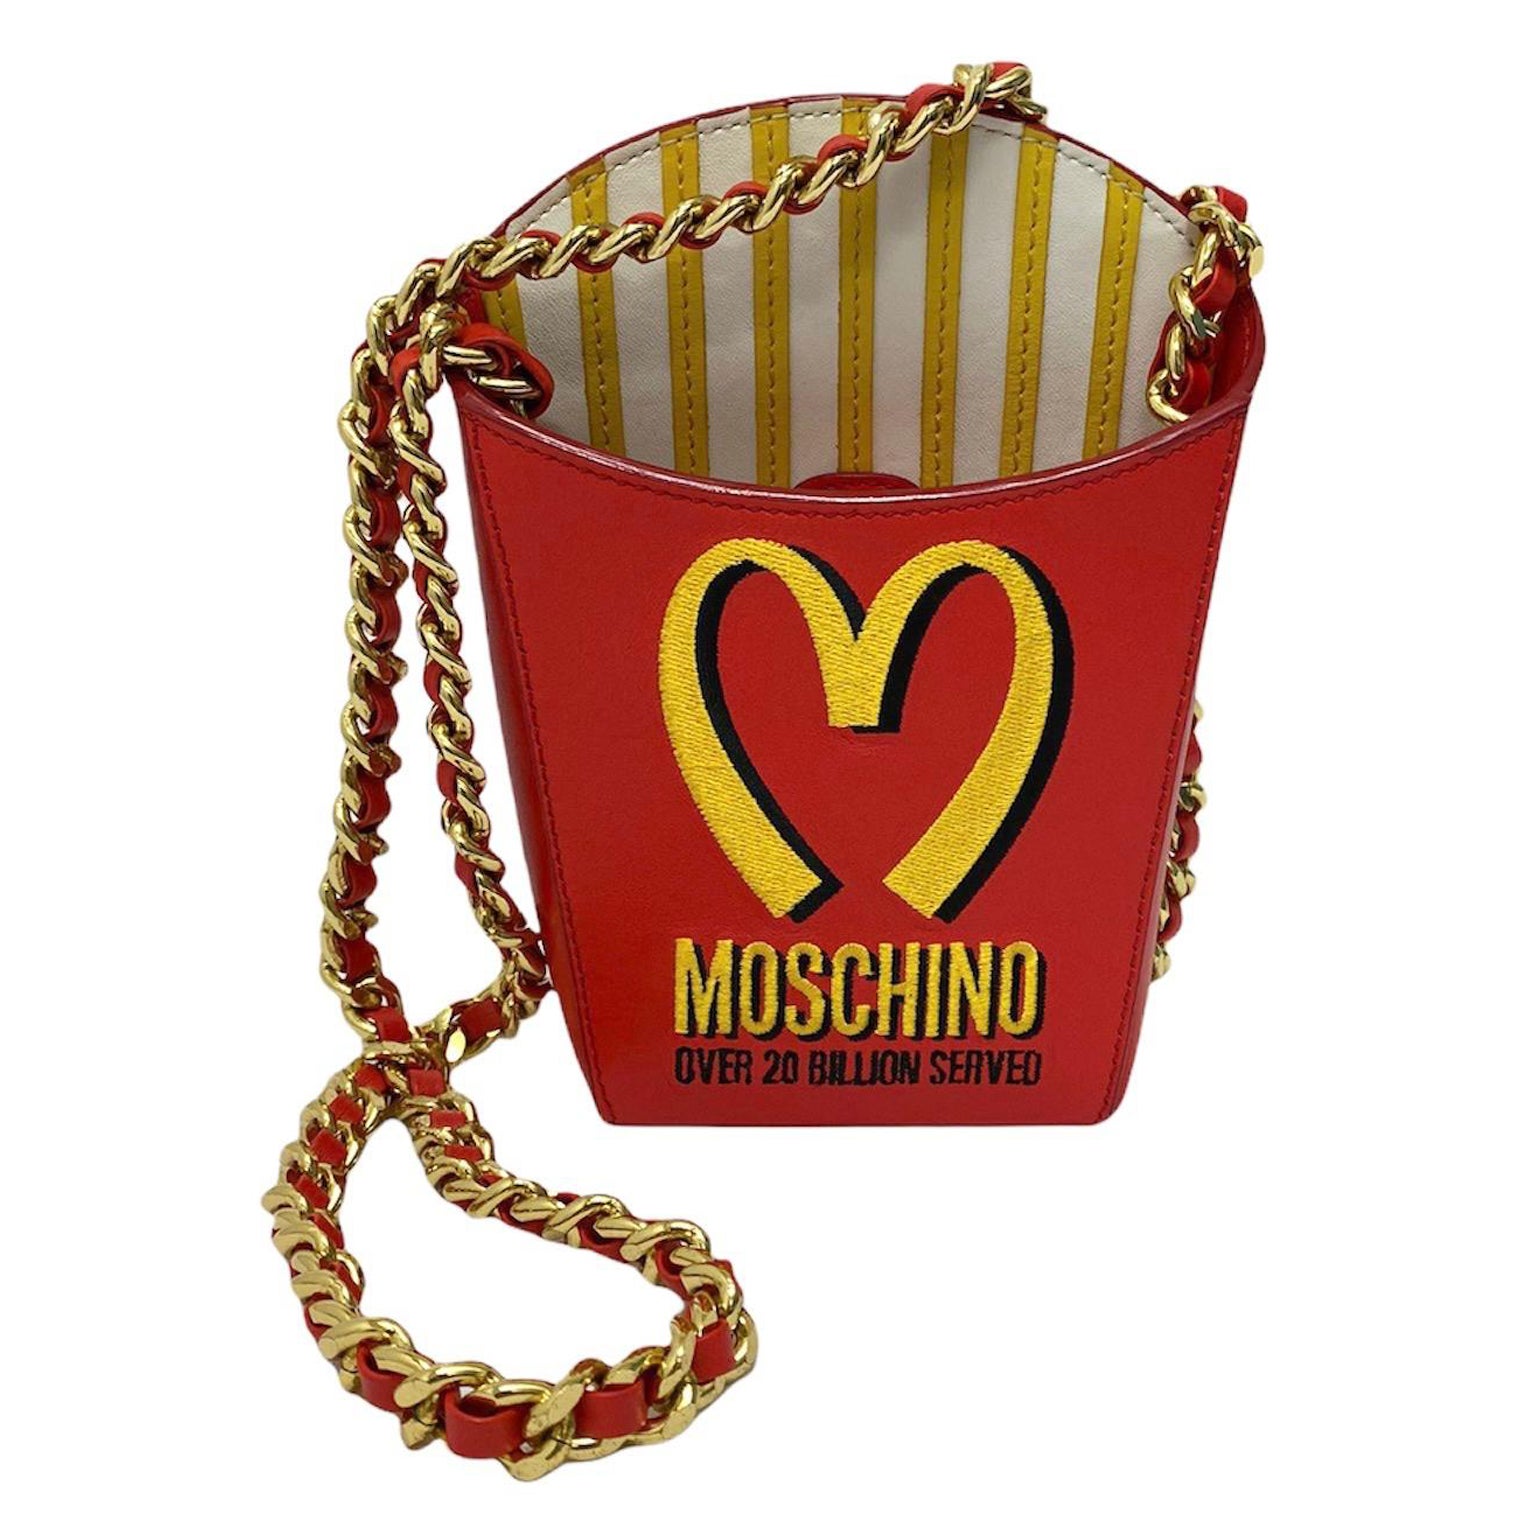 Moschino Red Leather Limited Edition Bag